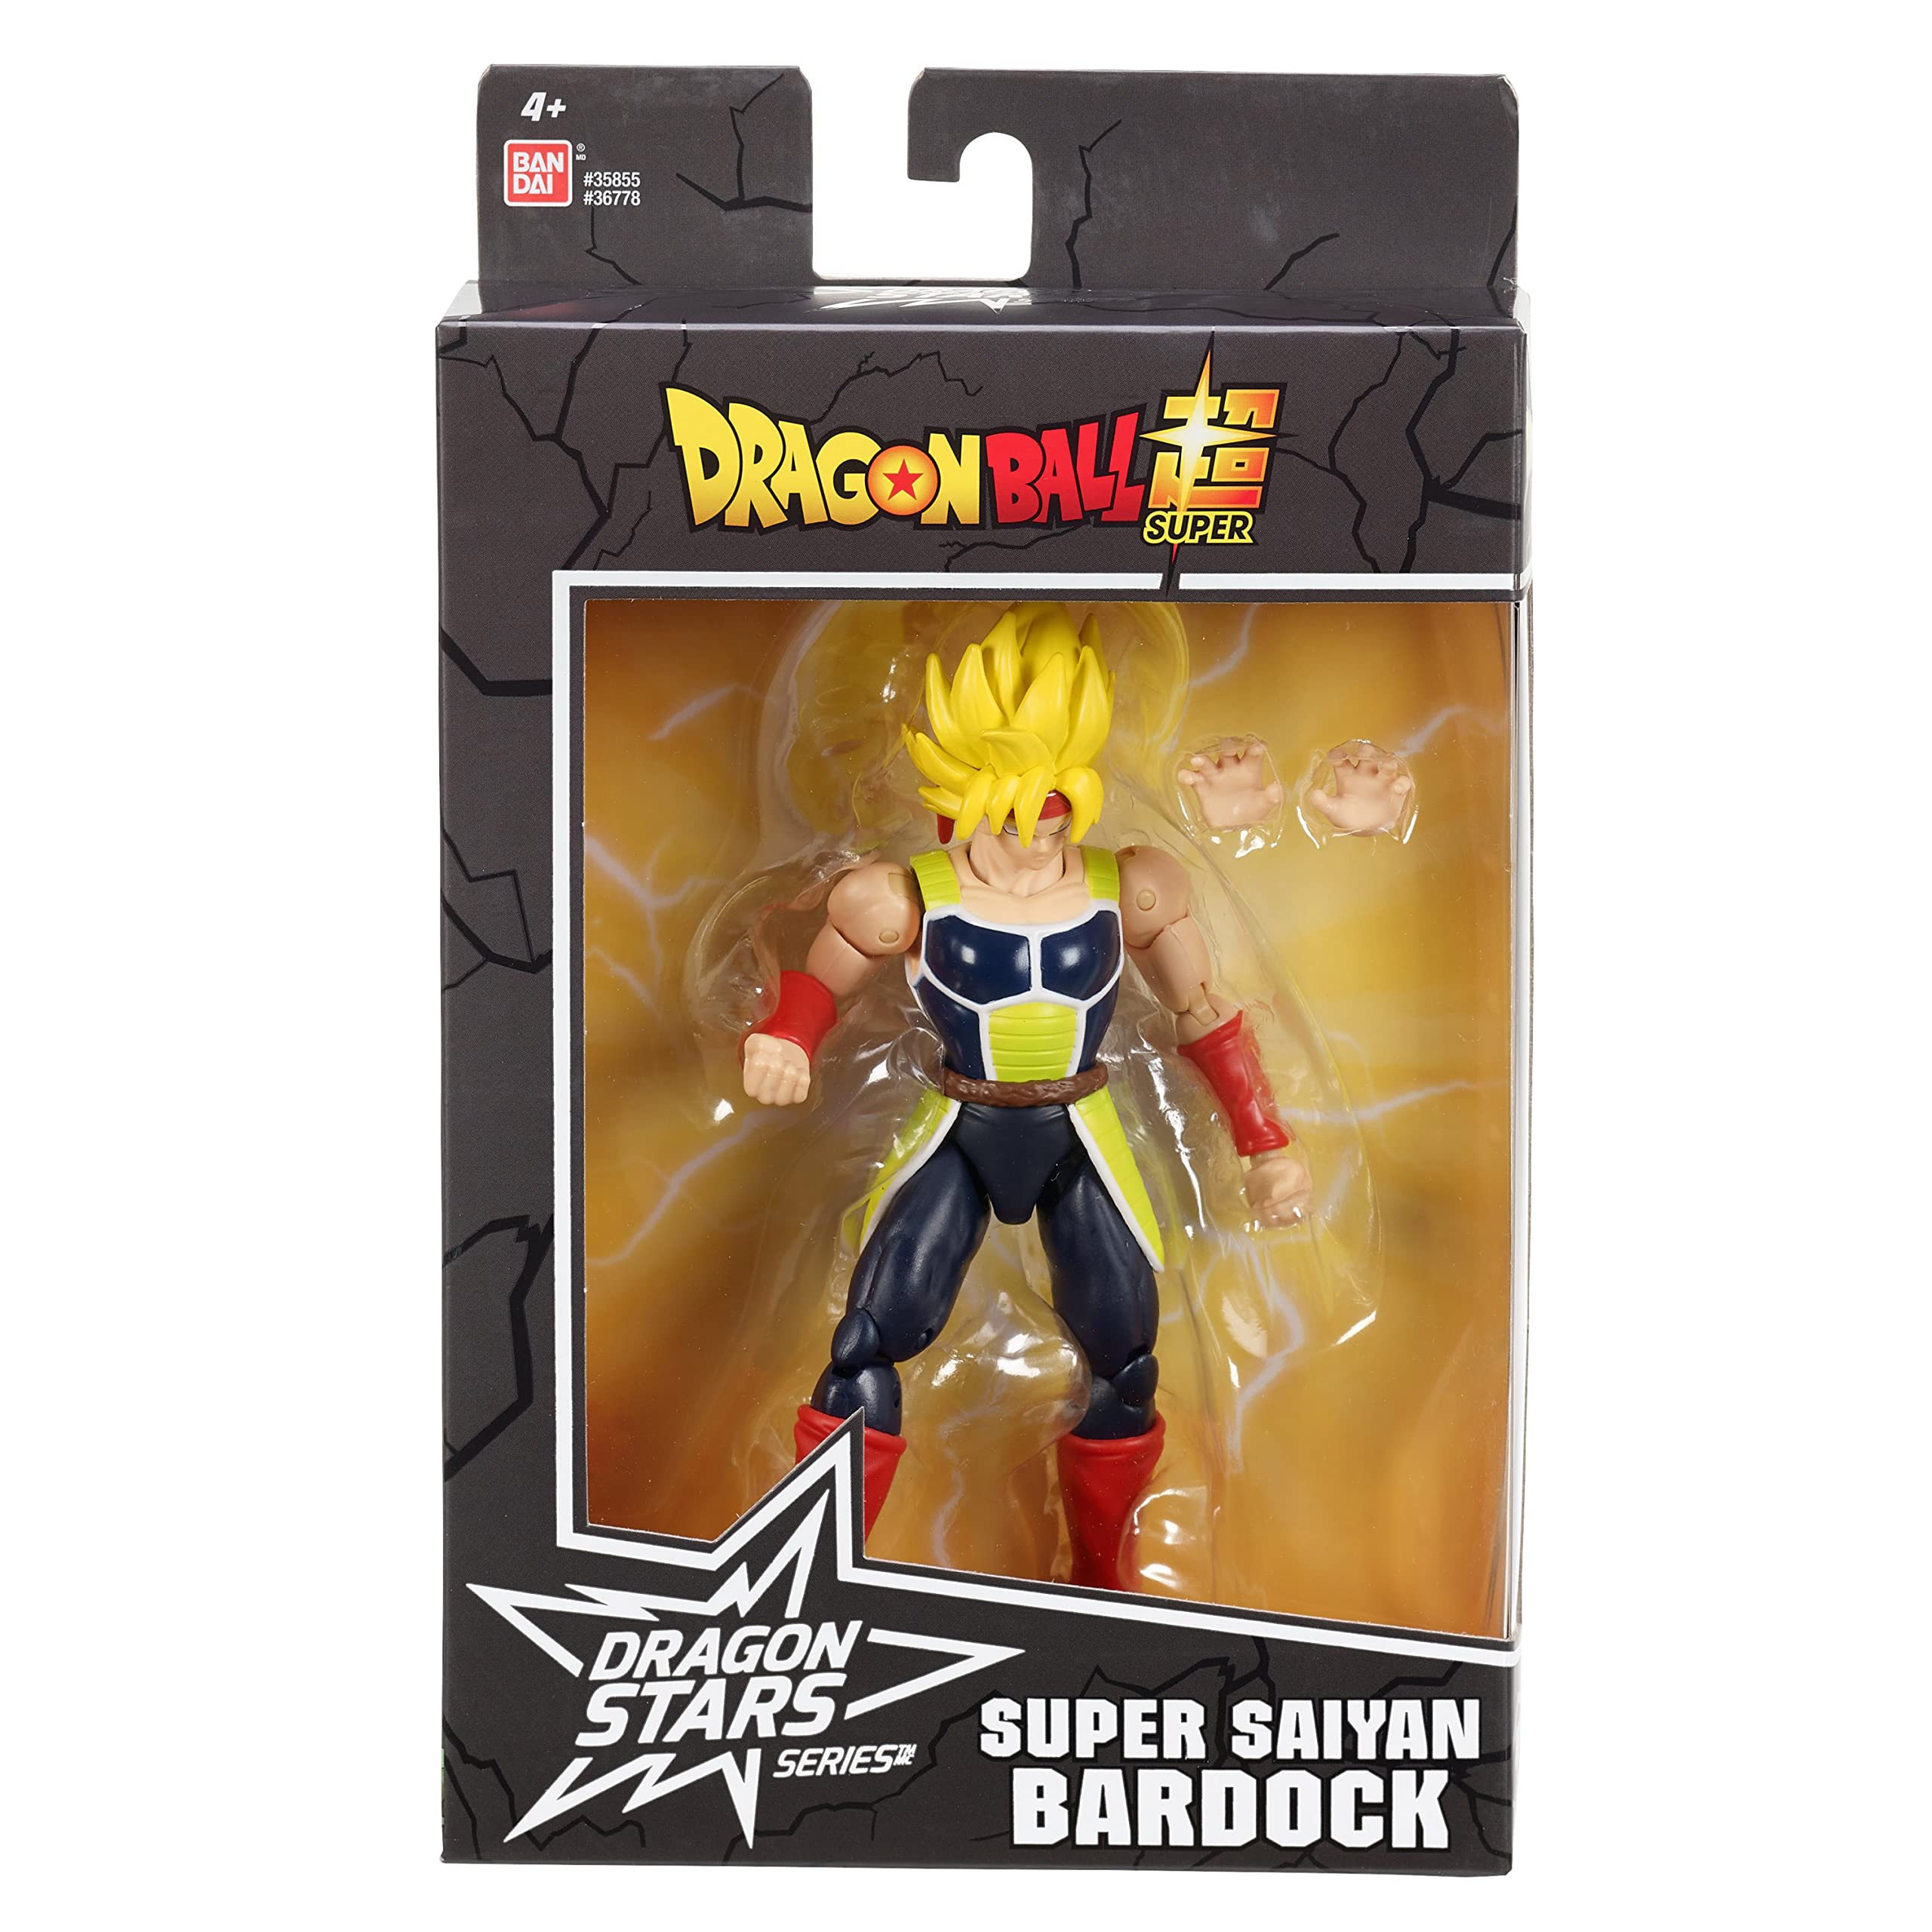 Pin on Bardock and Son family